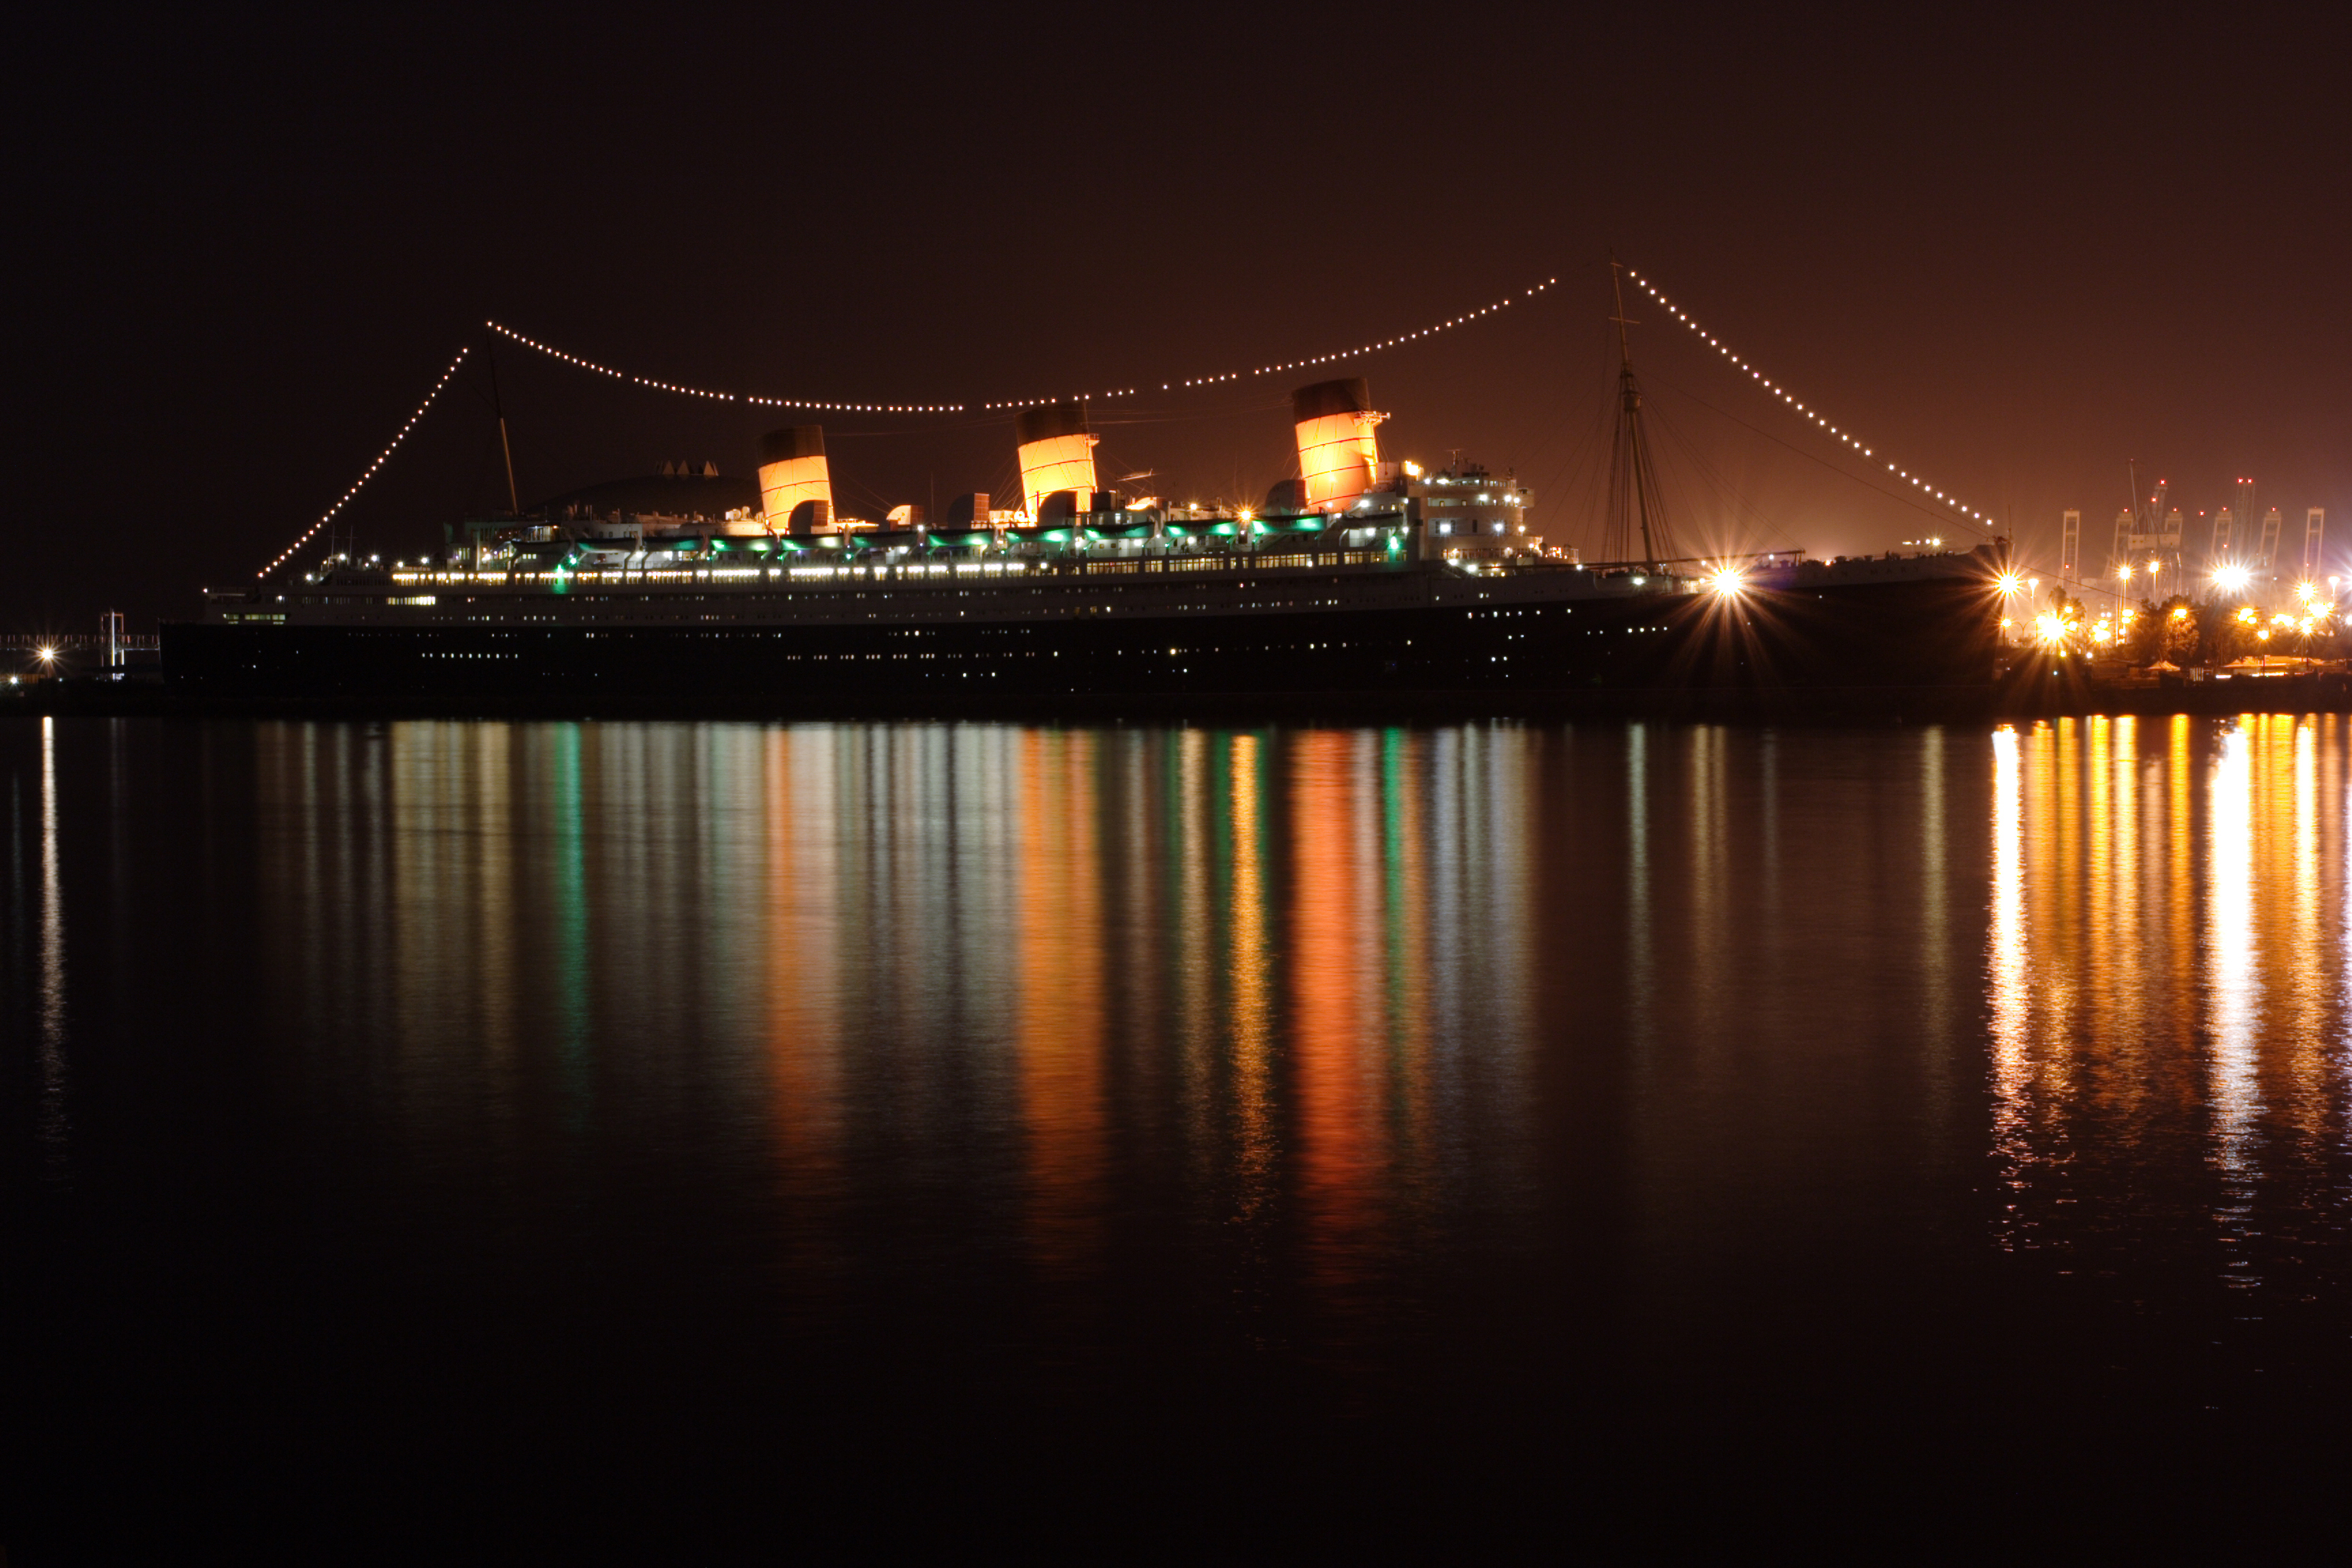 Queen Mary at night - ZoeYCKiStockGetty Images PlusGetty Images